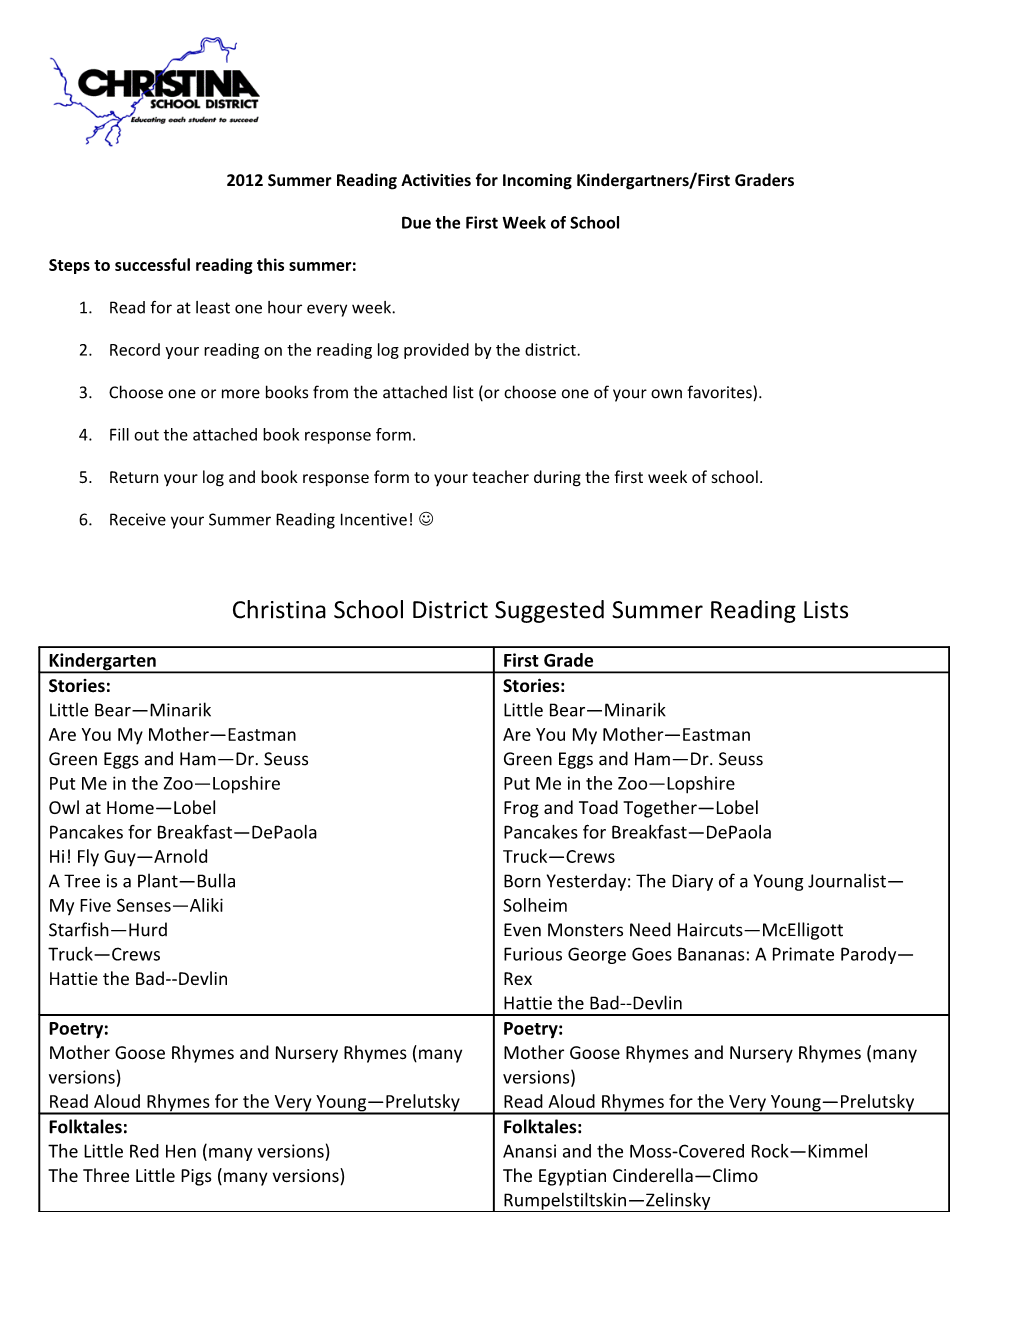 2012 Summer Reading Activities for Incoming Kindergartners/First Graders